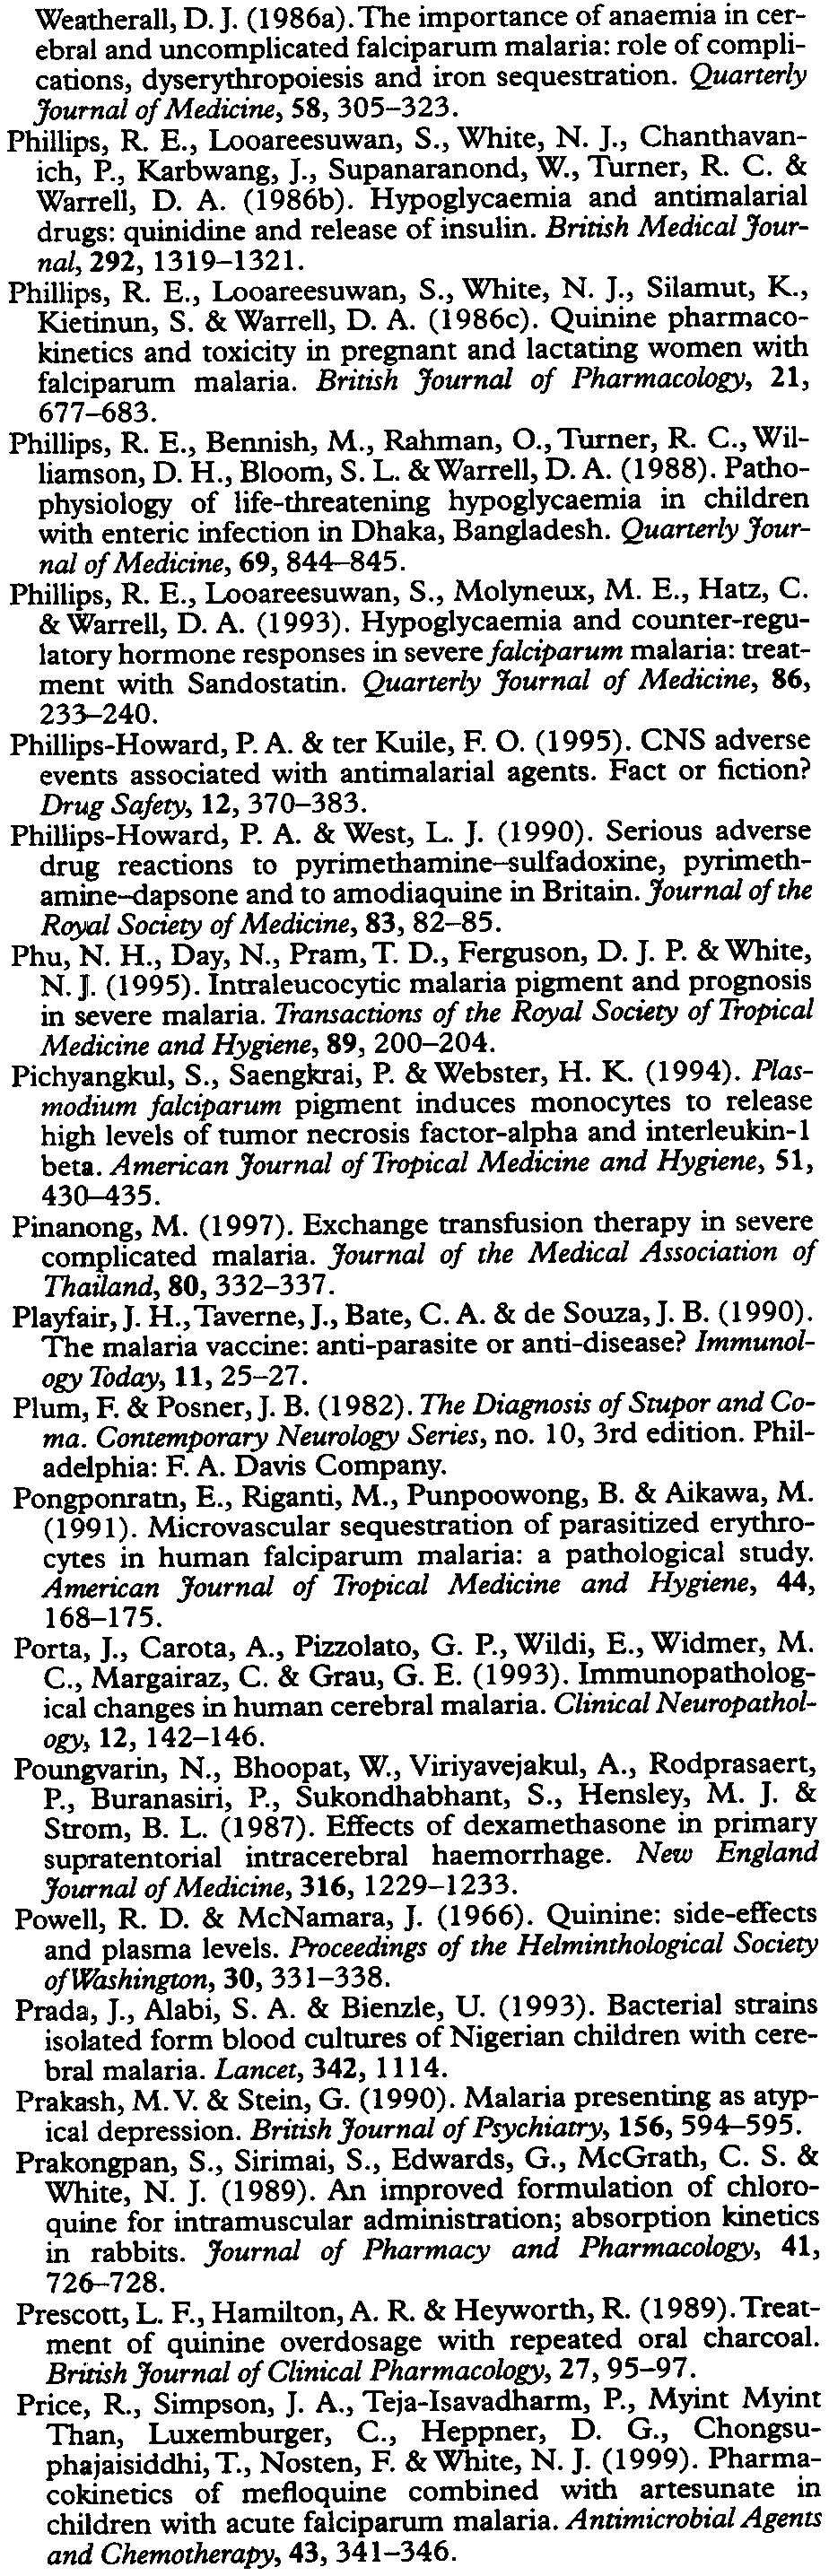 51/84 SEVERE FALCIPARUM MAlARIA Oh, M. S. & Carroll, H. J. (1977). The renin-aldosterone system and thiazide-induced depletion of total body potassium in essential hypertension. Nephron, 21,269-276.